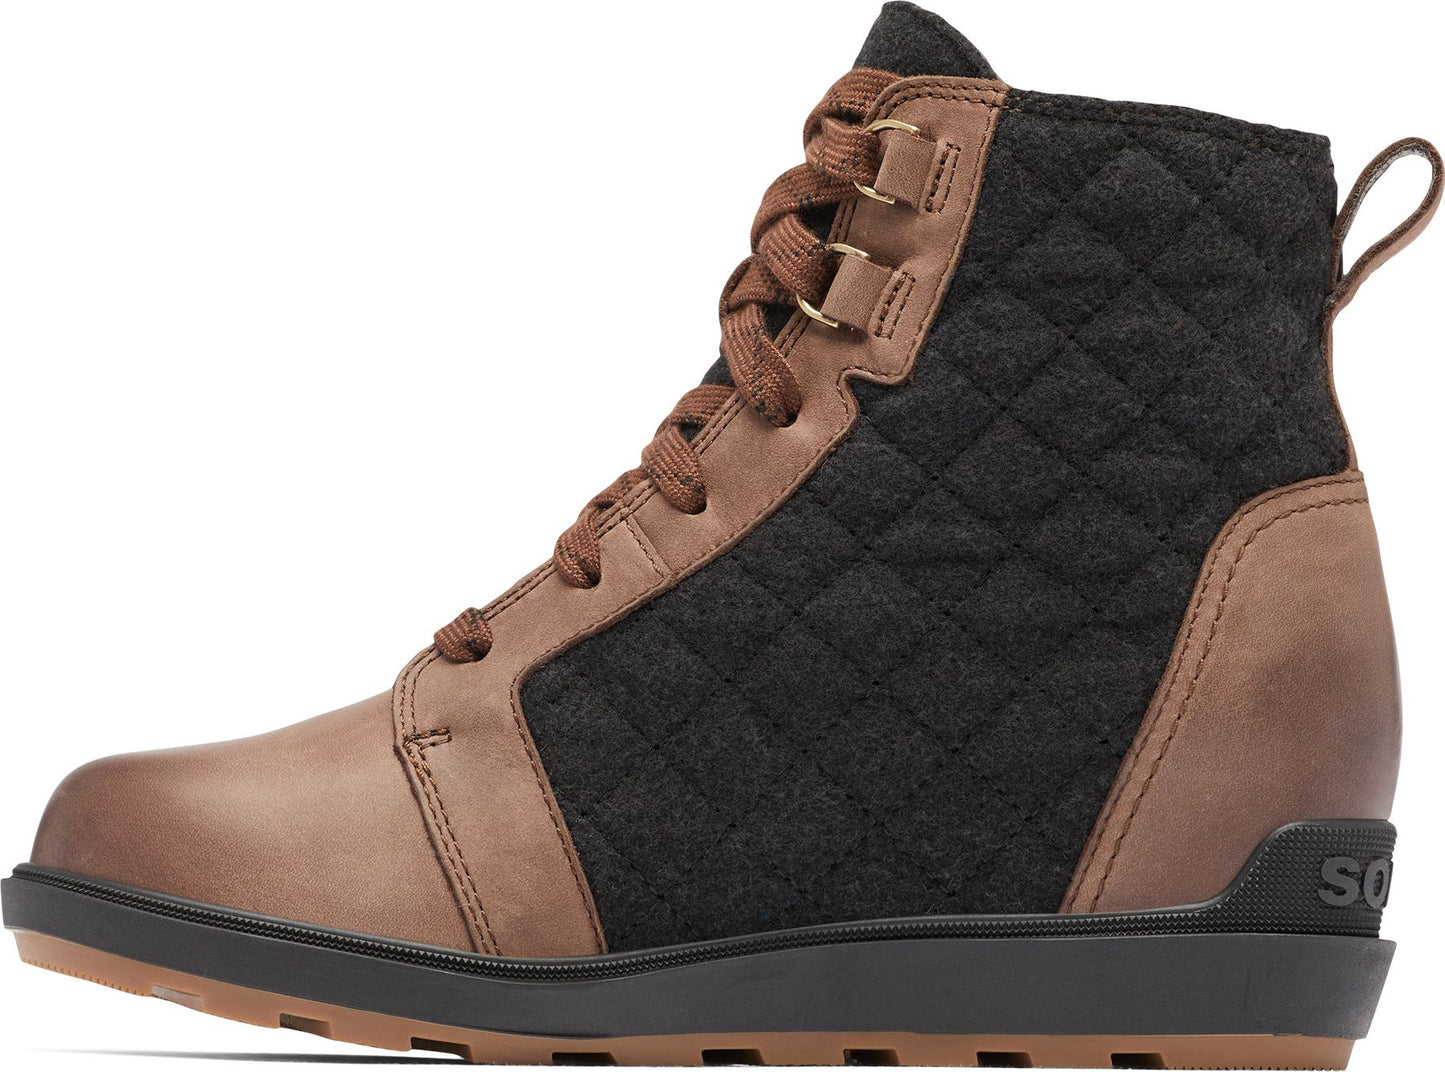 Sorel Boots Evie 2 Nw Lace Tobacco